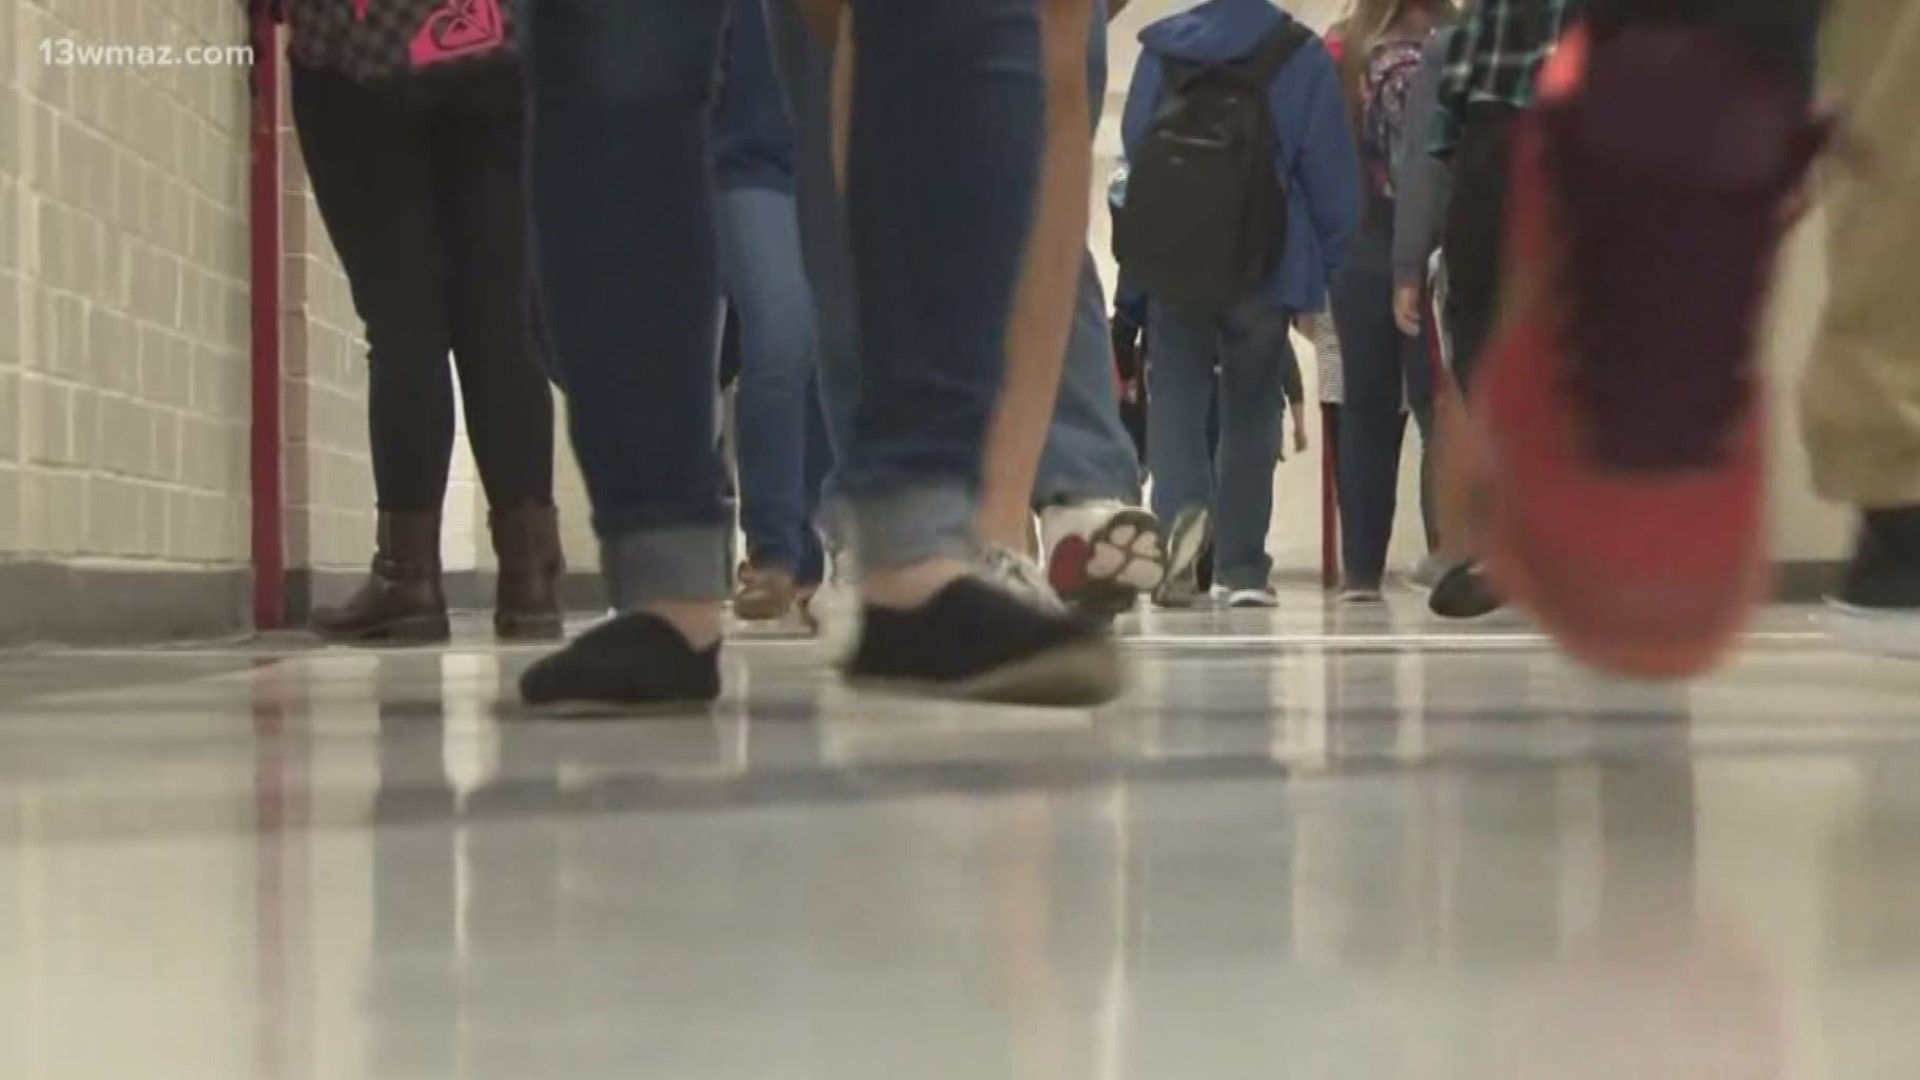 Houston County schools getting more crowded